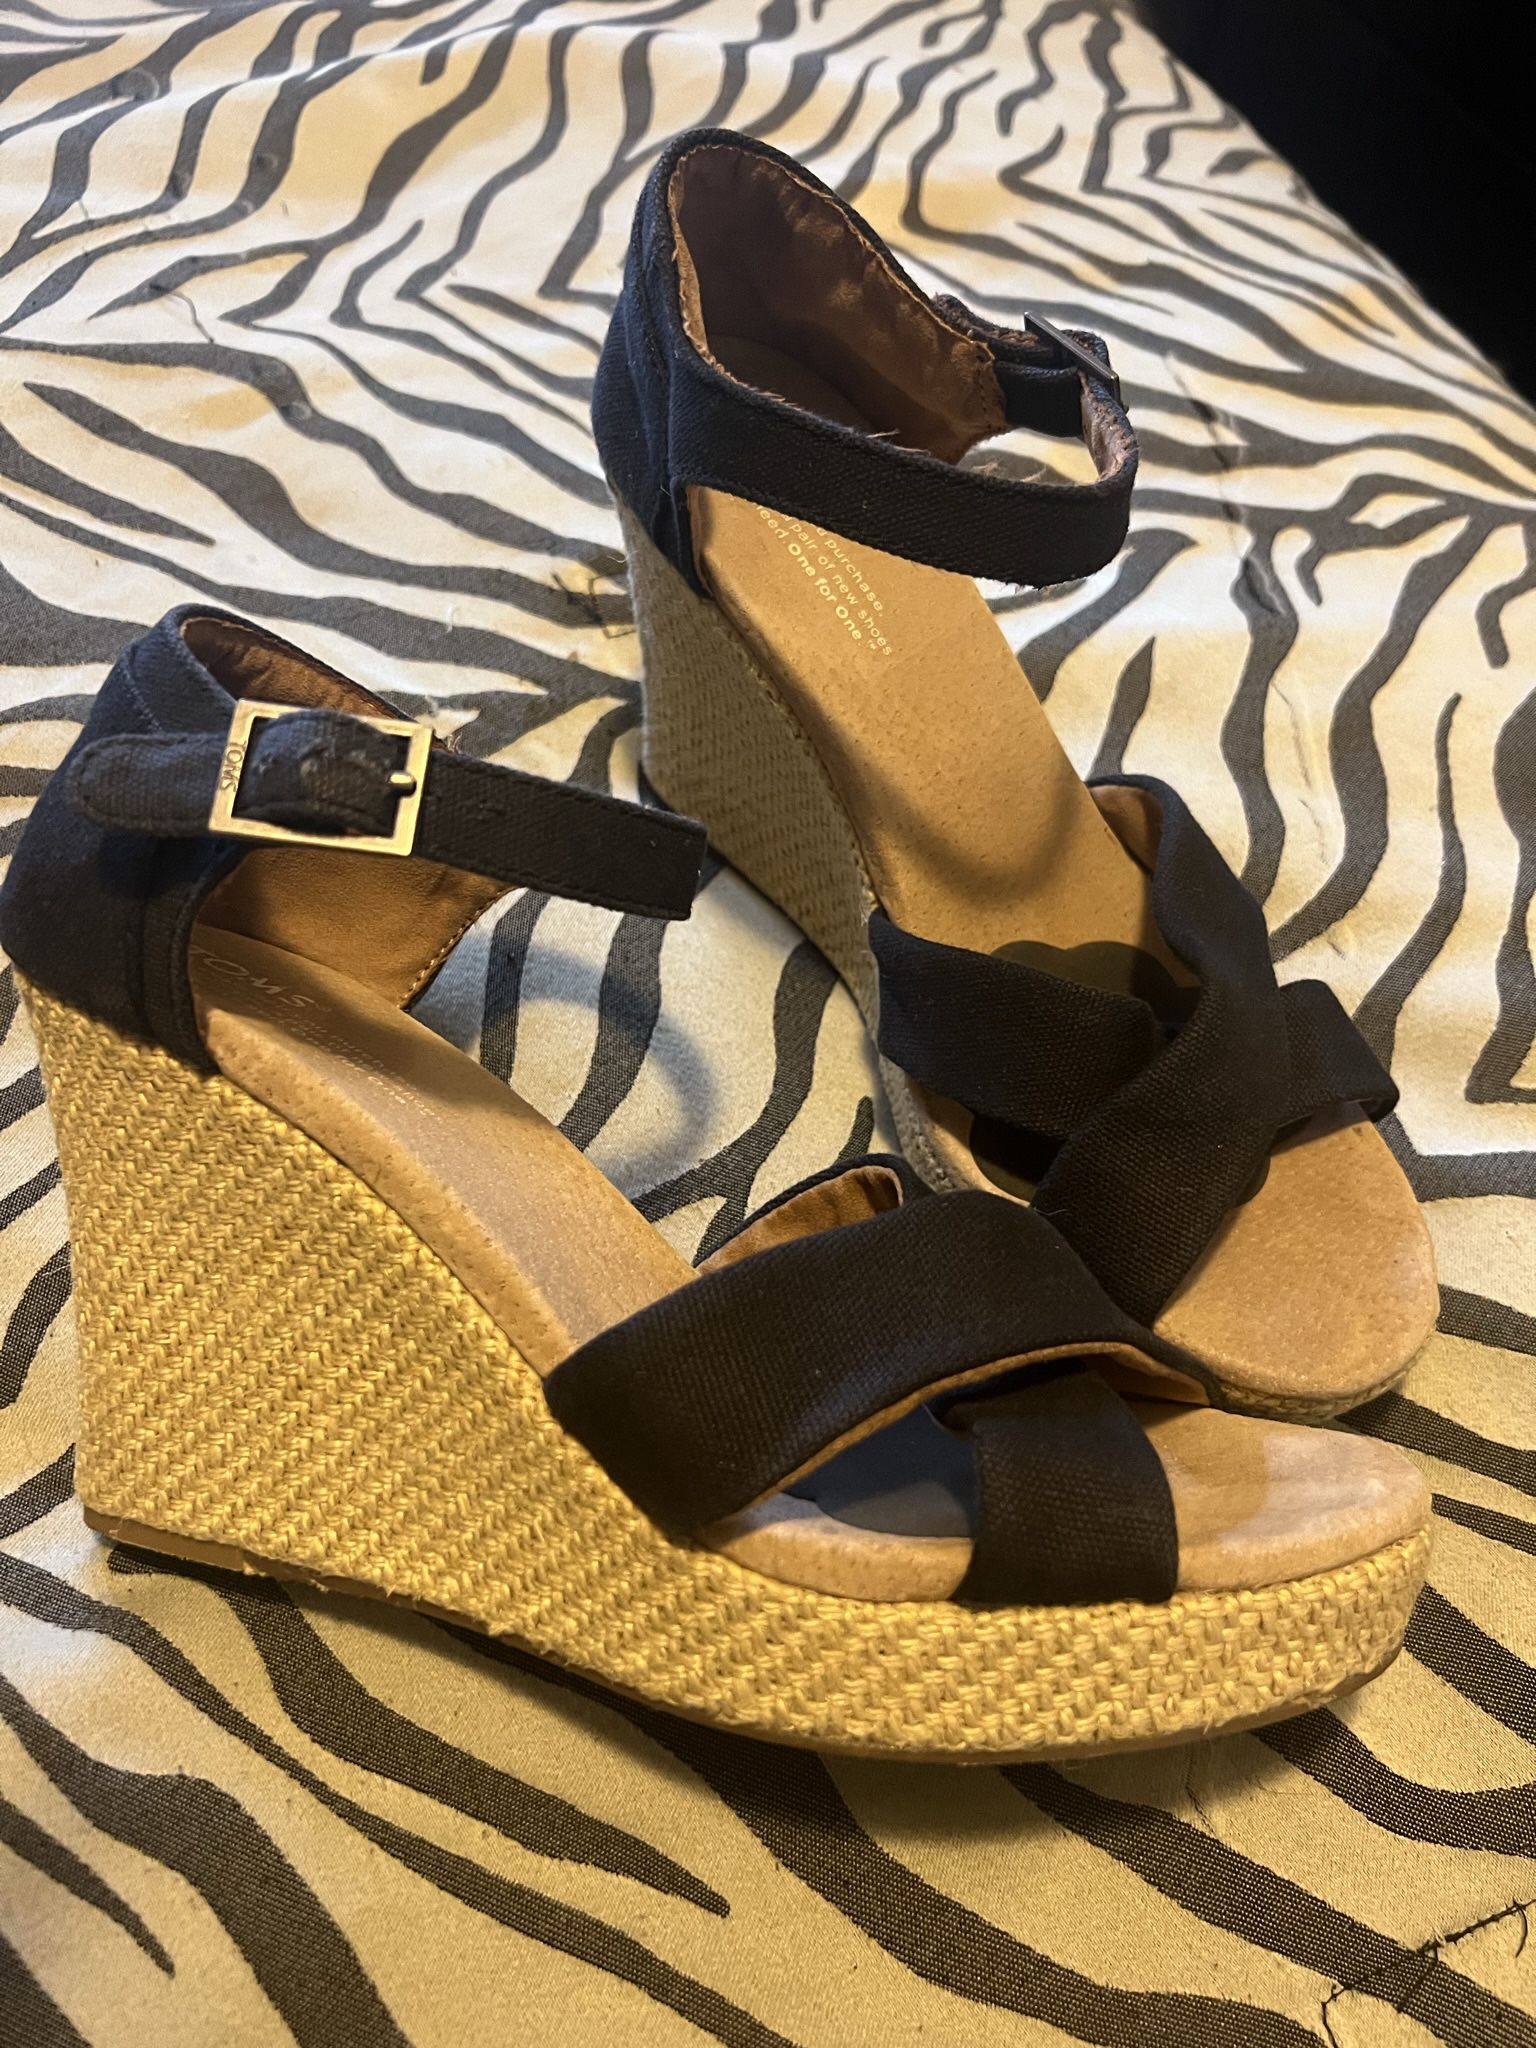 Tom’s Wedges Size 8